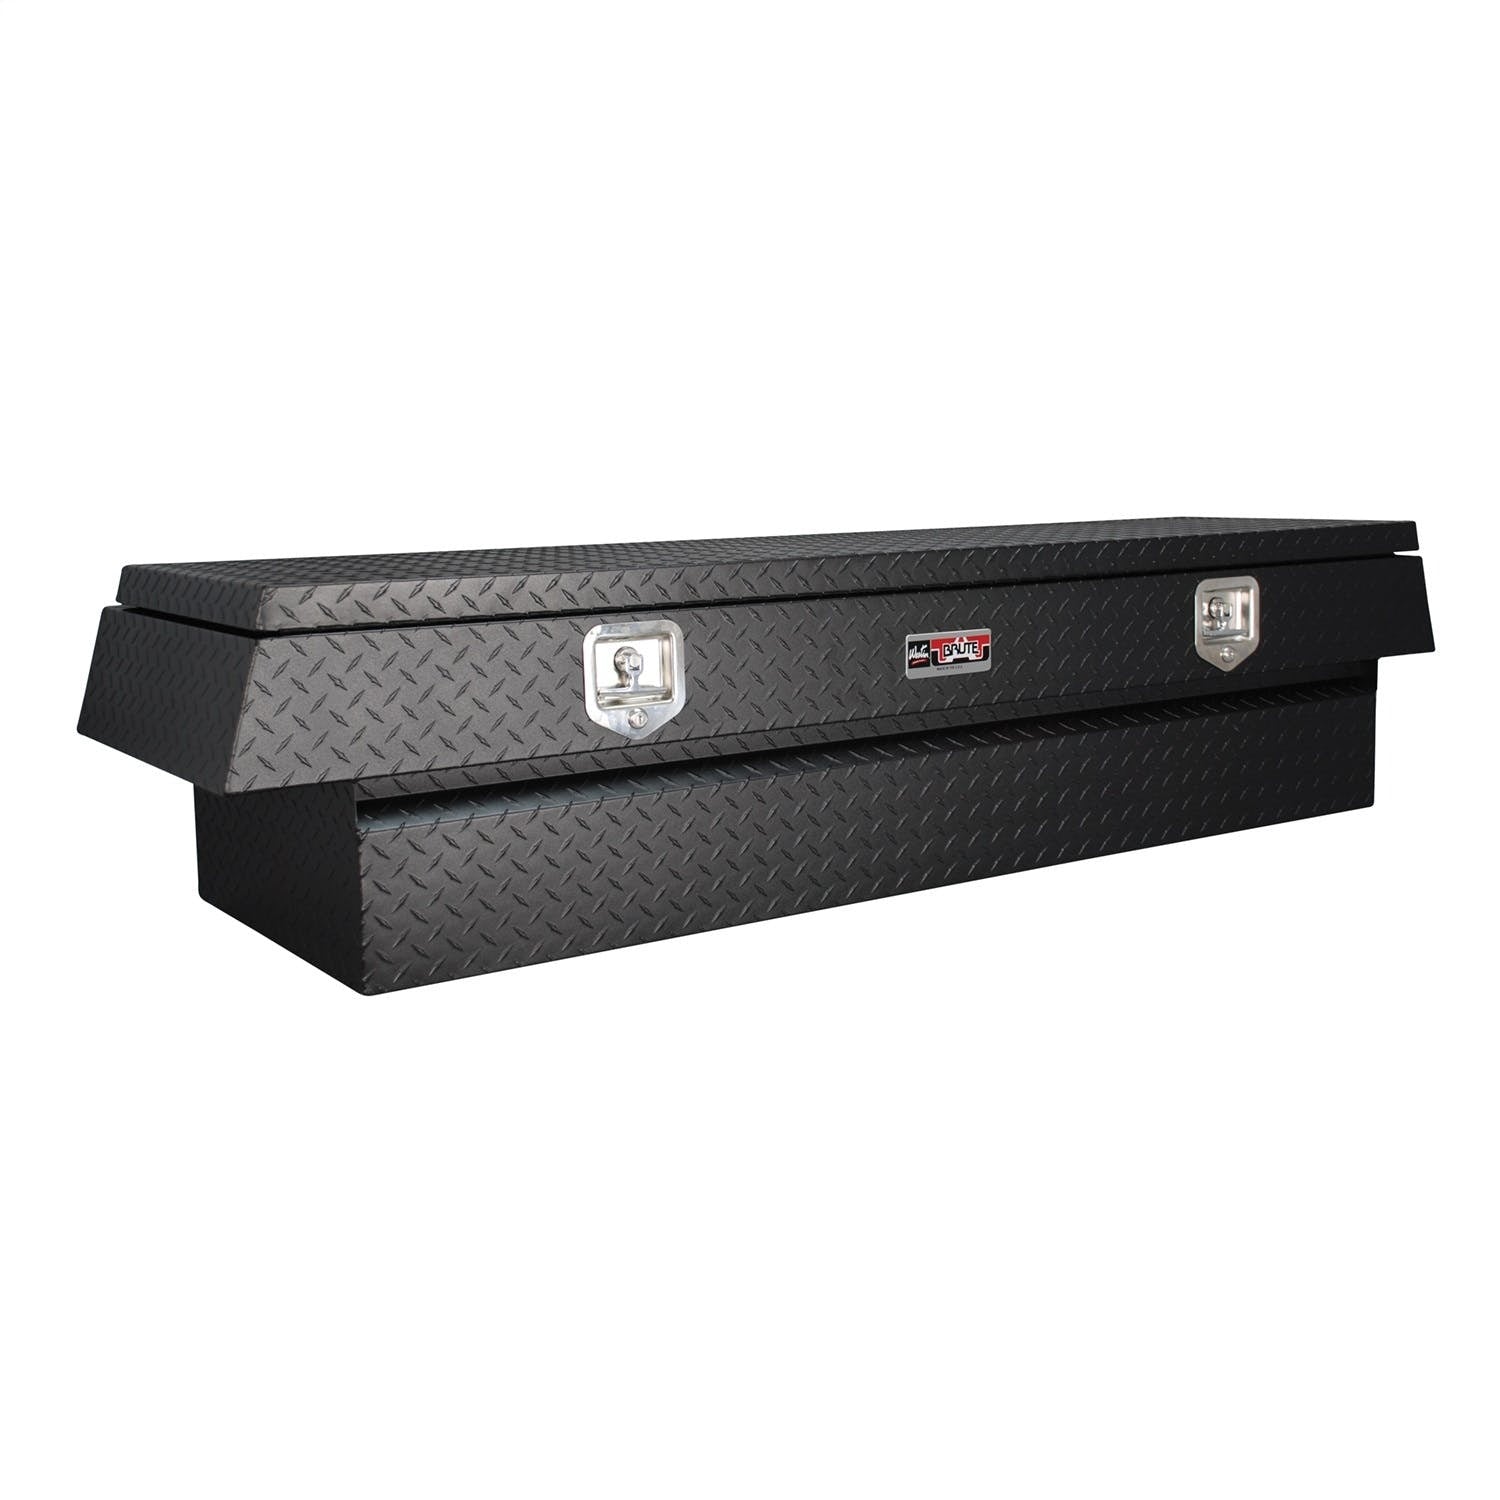 Westin Automotive 80-RB674-BT Chest 47in Overall Dims: 47x20x19 In.; Base Dims: 47x16x19